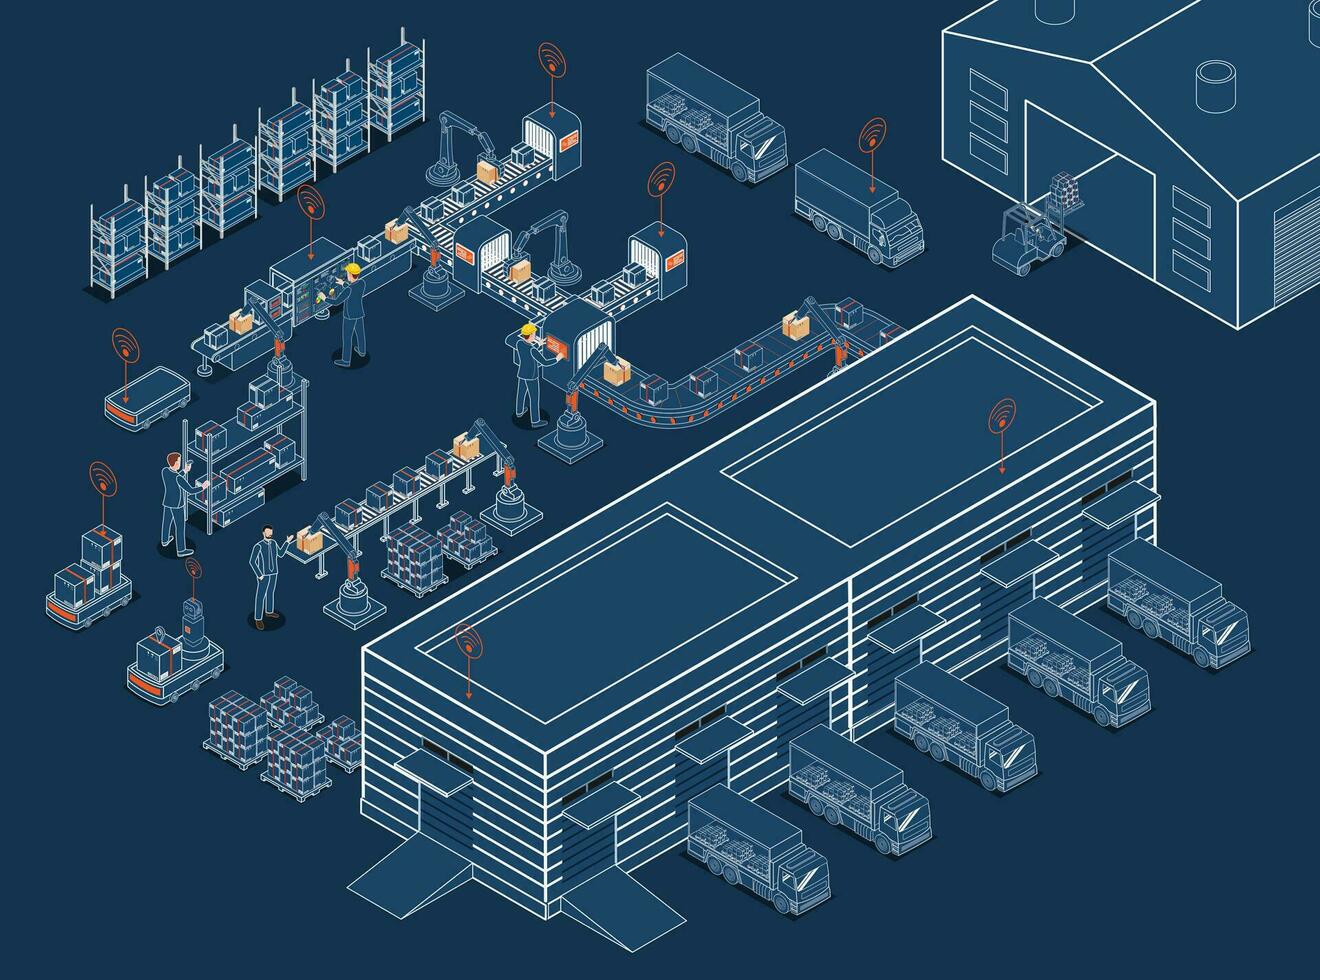 Smart Warehouse Management System with Warehouse simulation, Logistics flexibility, Robotic process automation and Accurate inventory counts. Vector illustration eps10